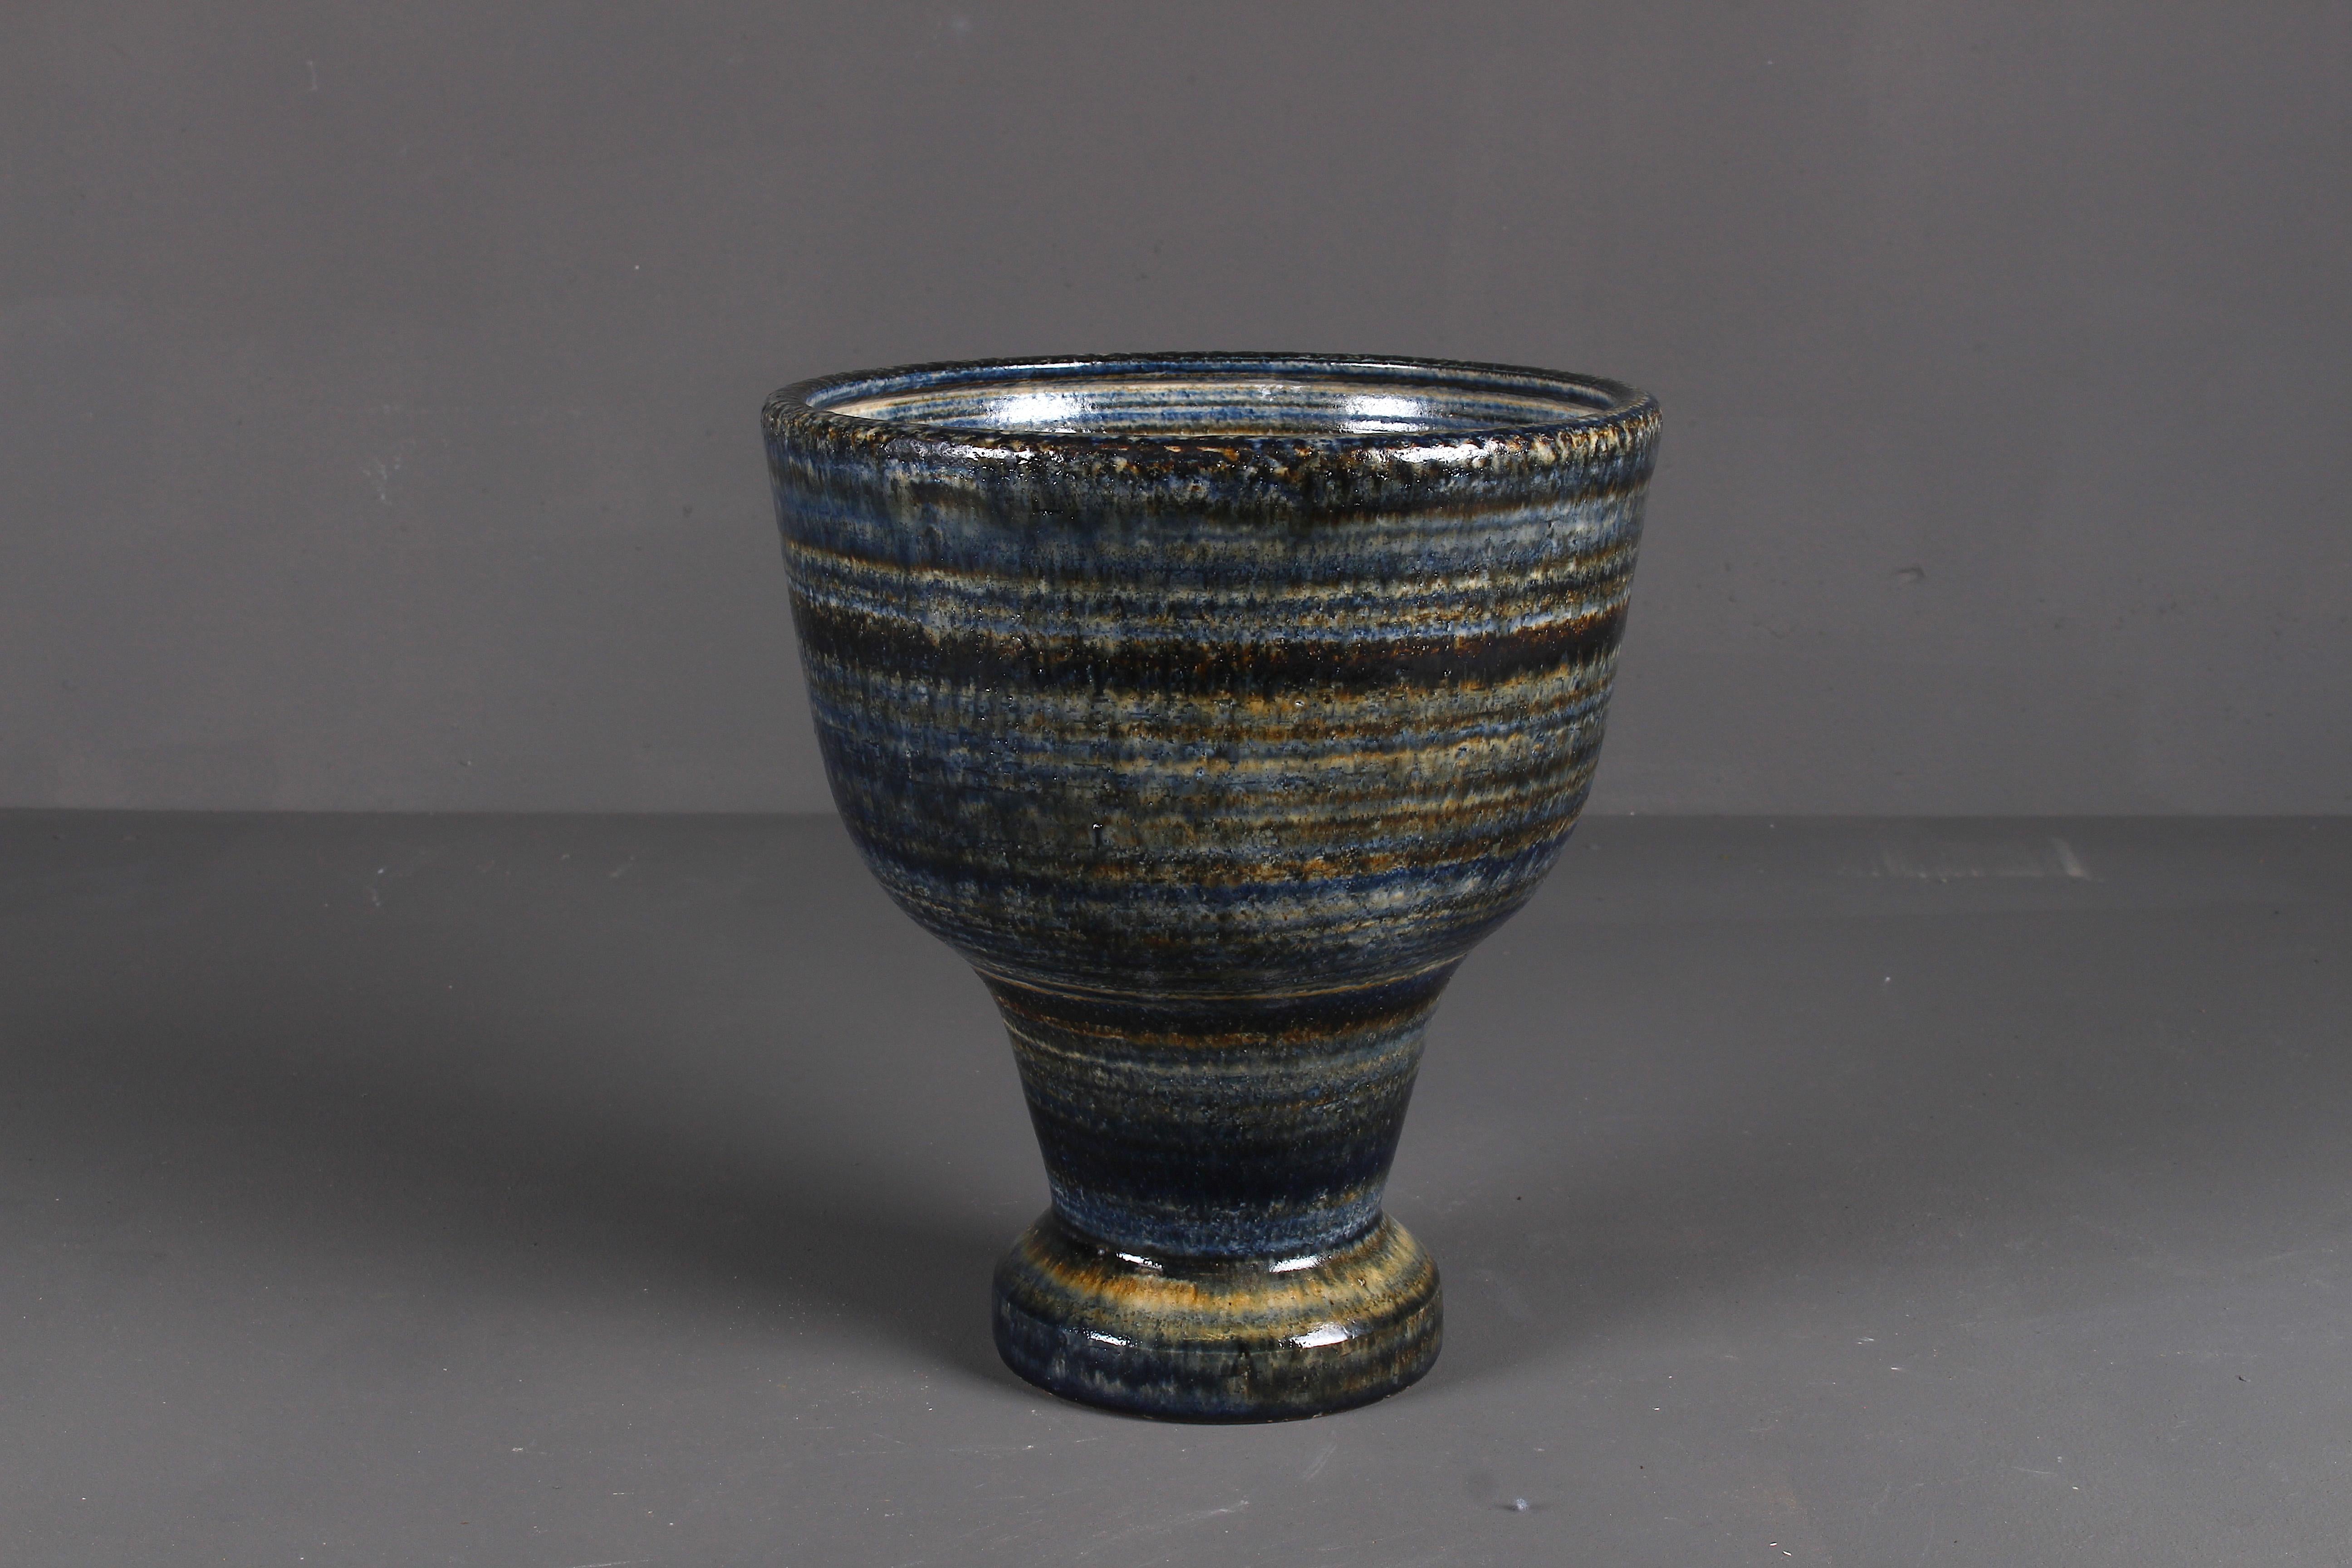 Rare large vase or bowl designed by Meindert Zaalberg in the late 1950s for Zaalberg Pottery Holland.
With different earth tones glazed terracotta, this unique piece of decorative art gives a very natural feeling in your home.
Signed with Zaalberg